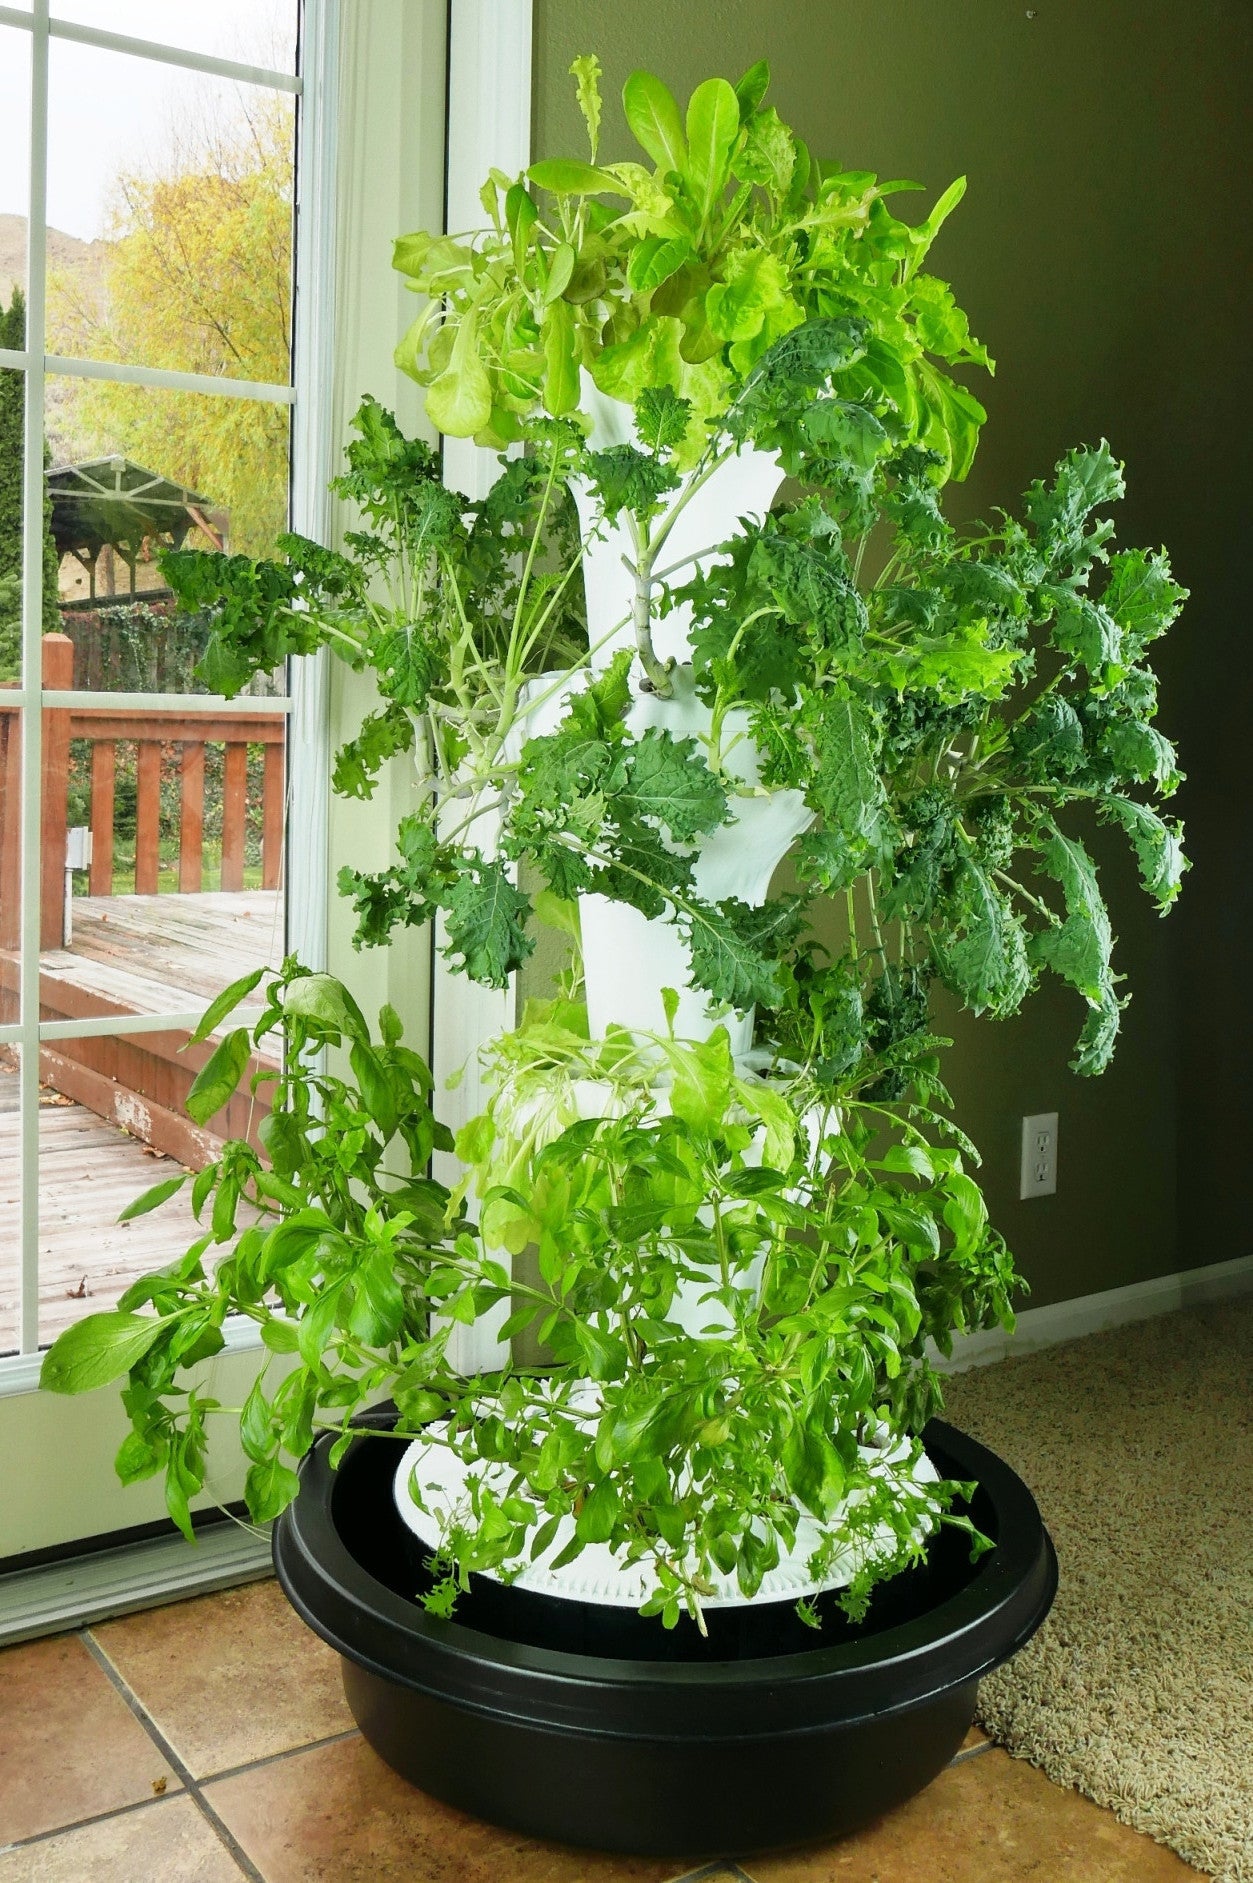 Foody 12 Hydroponic System Foody Vertical Gardens